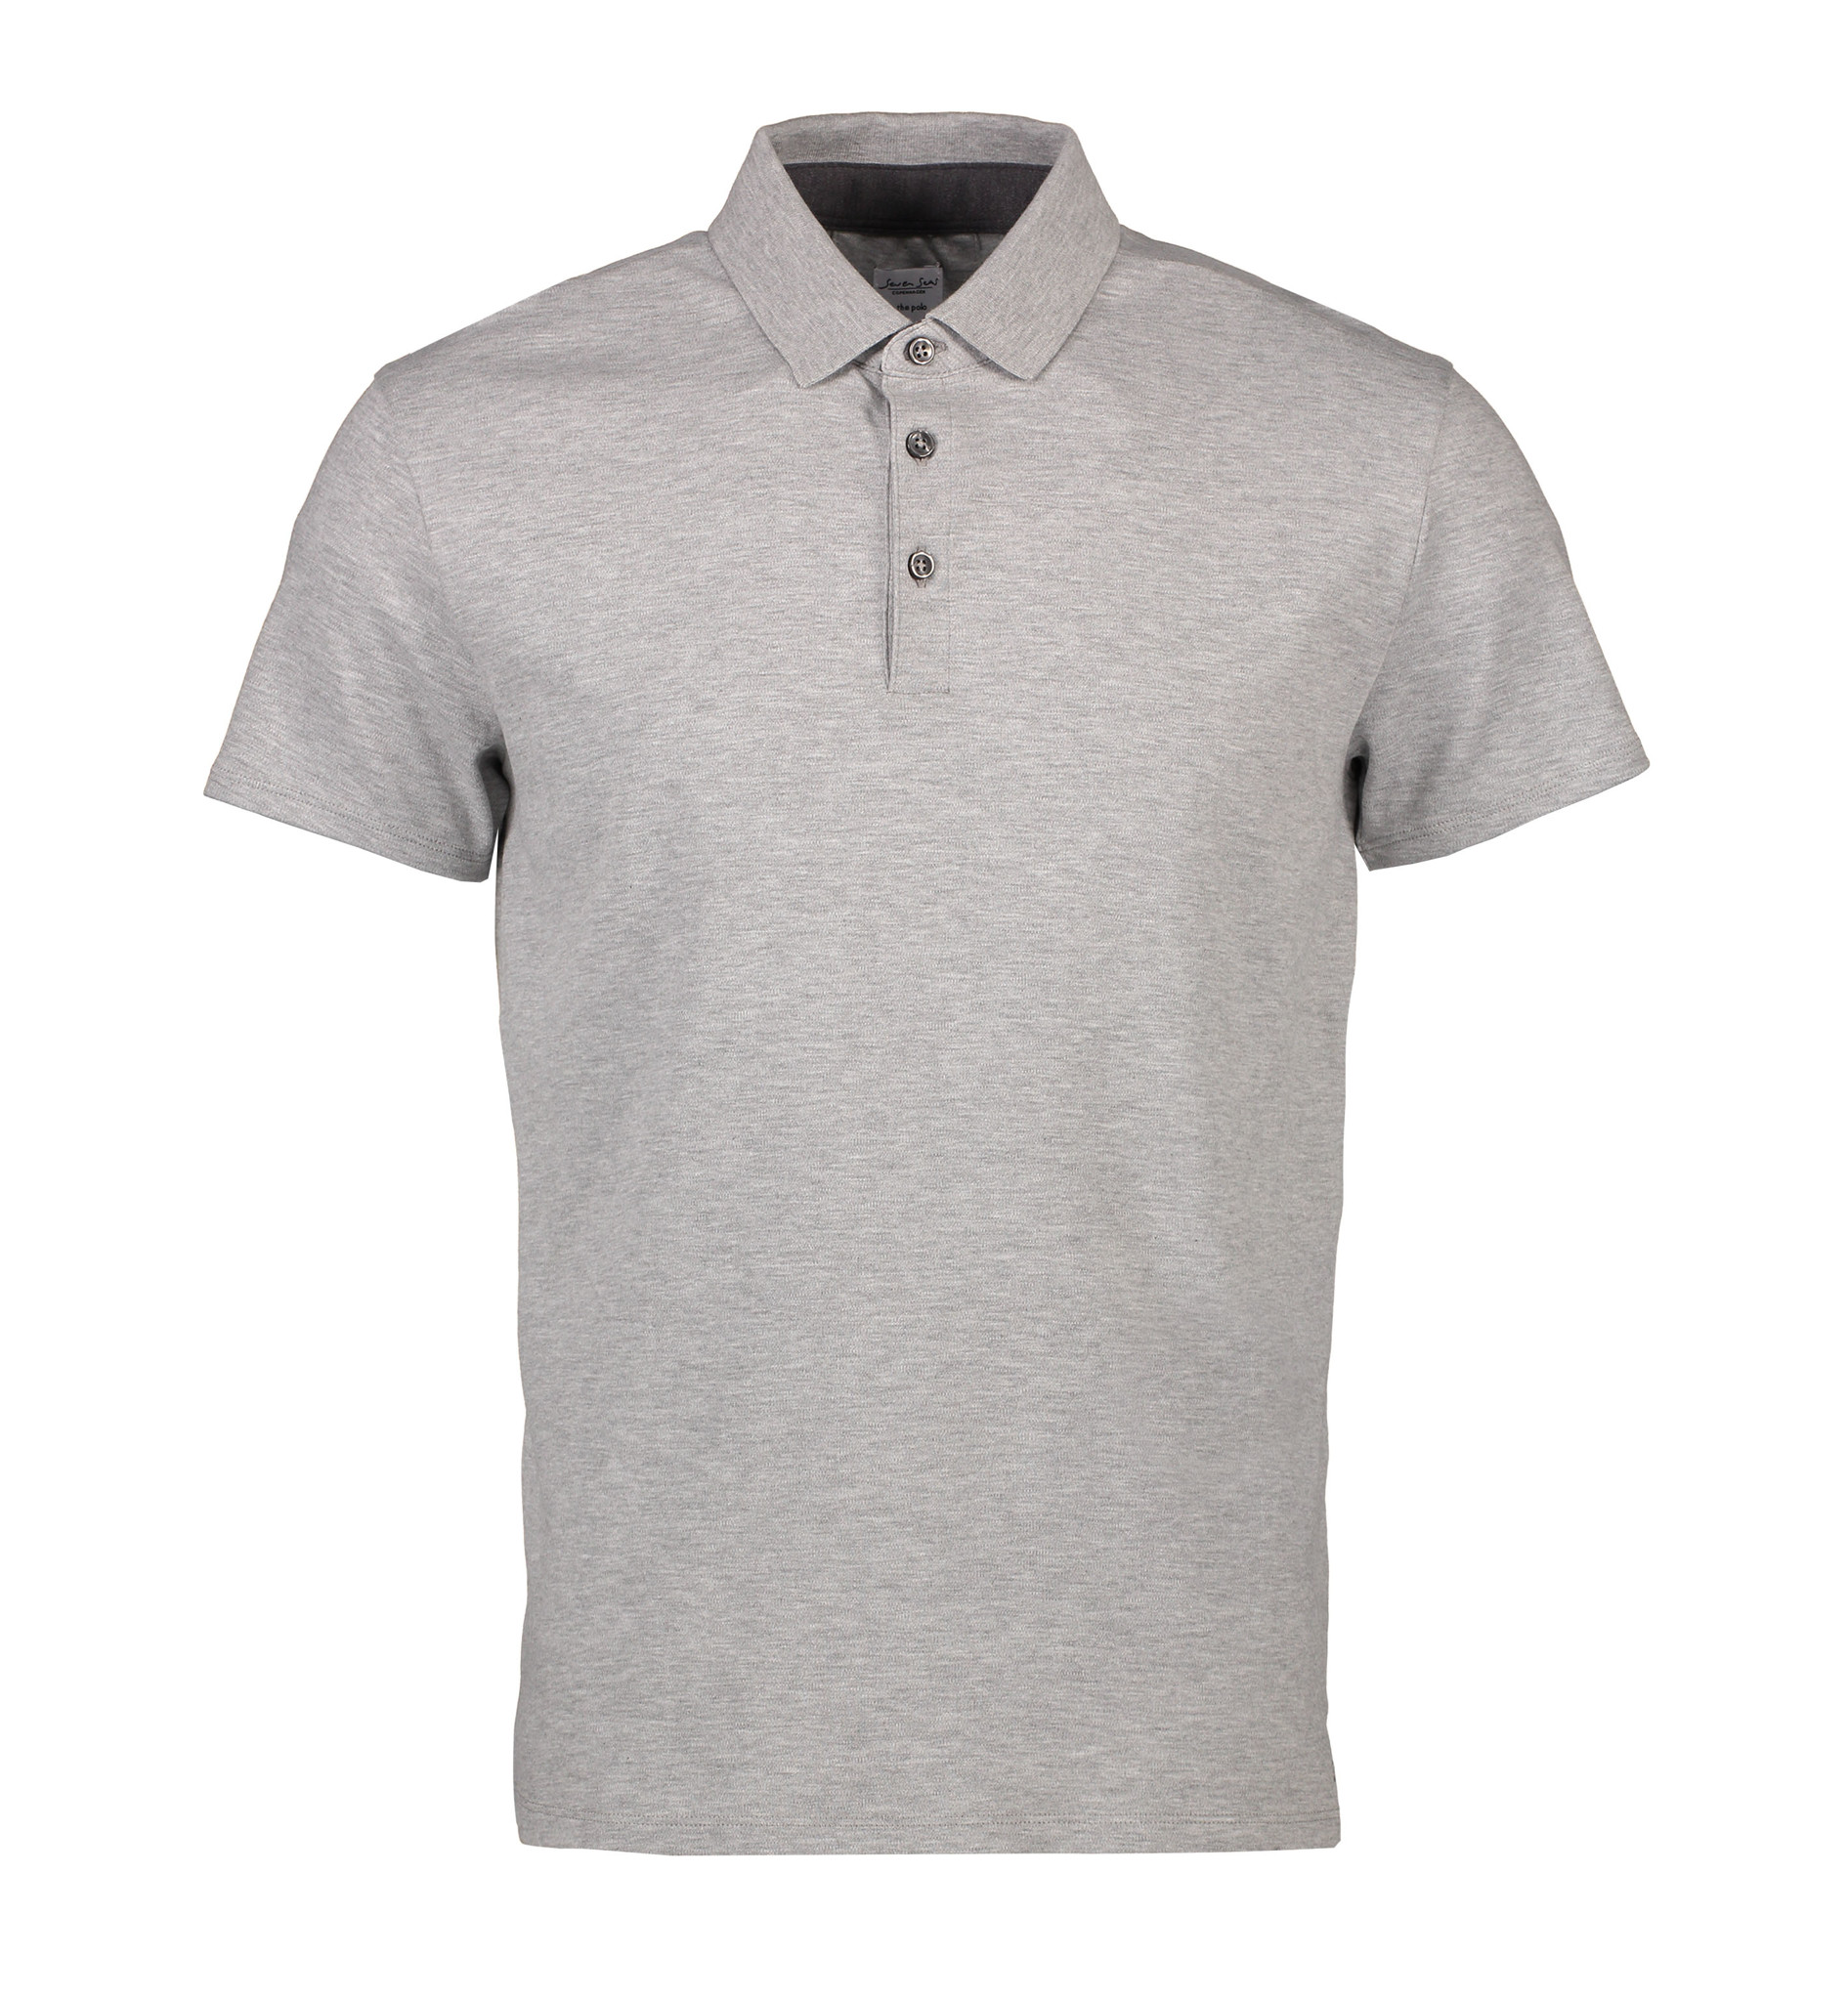 Picture of men's poloshirt